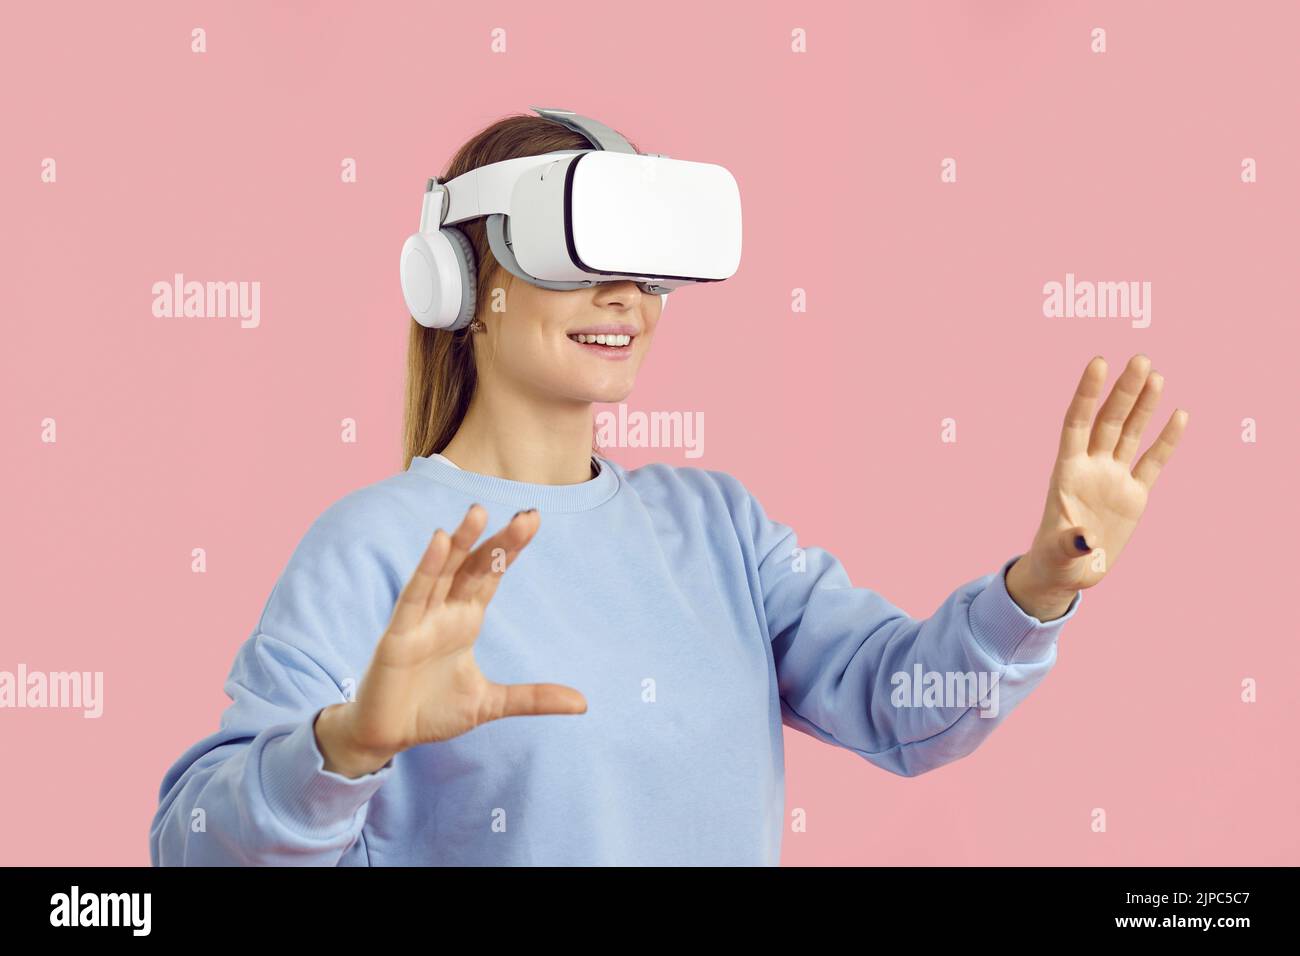 Smiling amazed young woman touching air during VR experience, isolated on pink background. Stock Photo